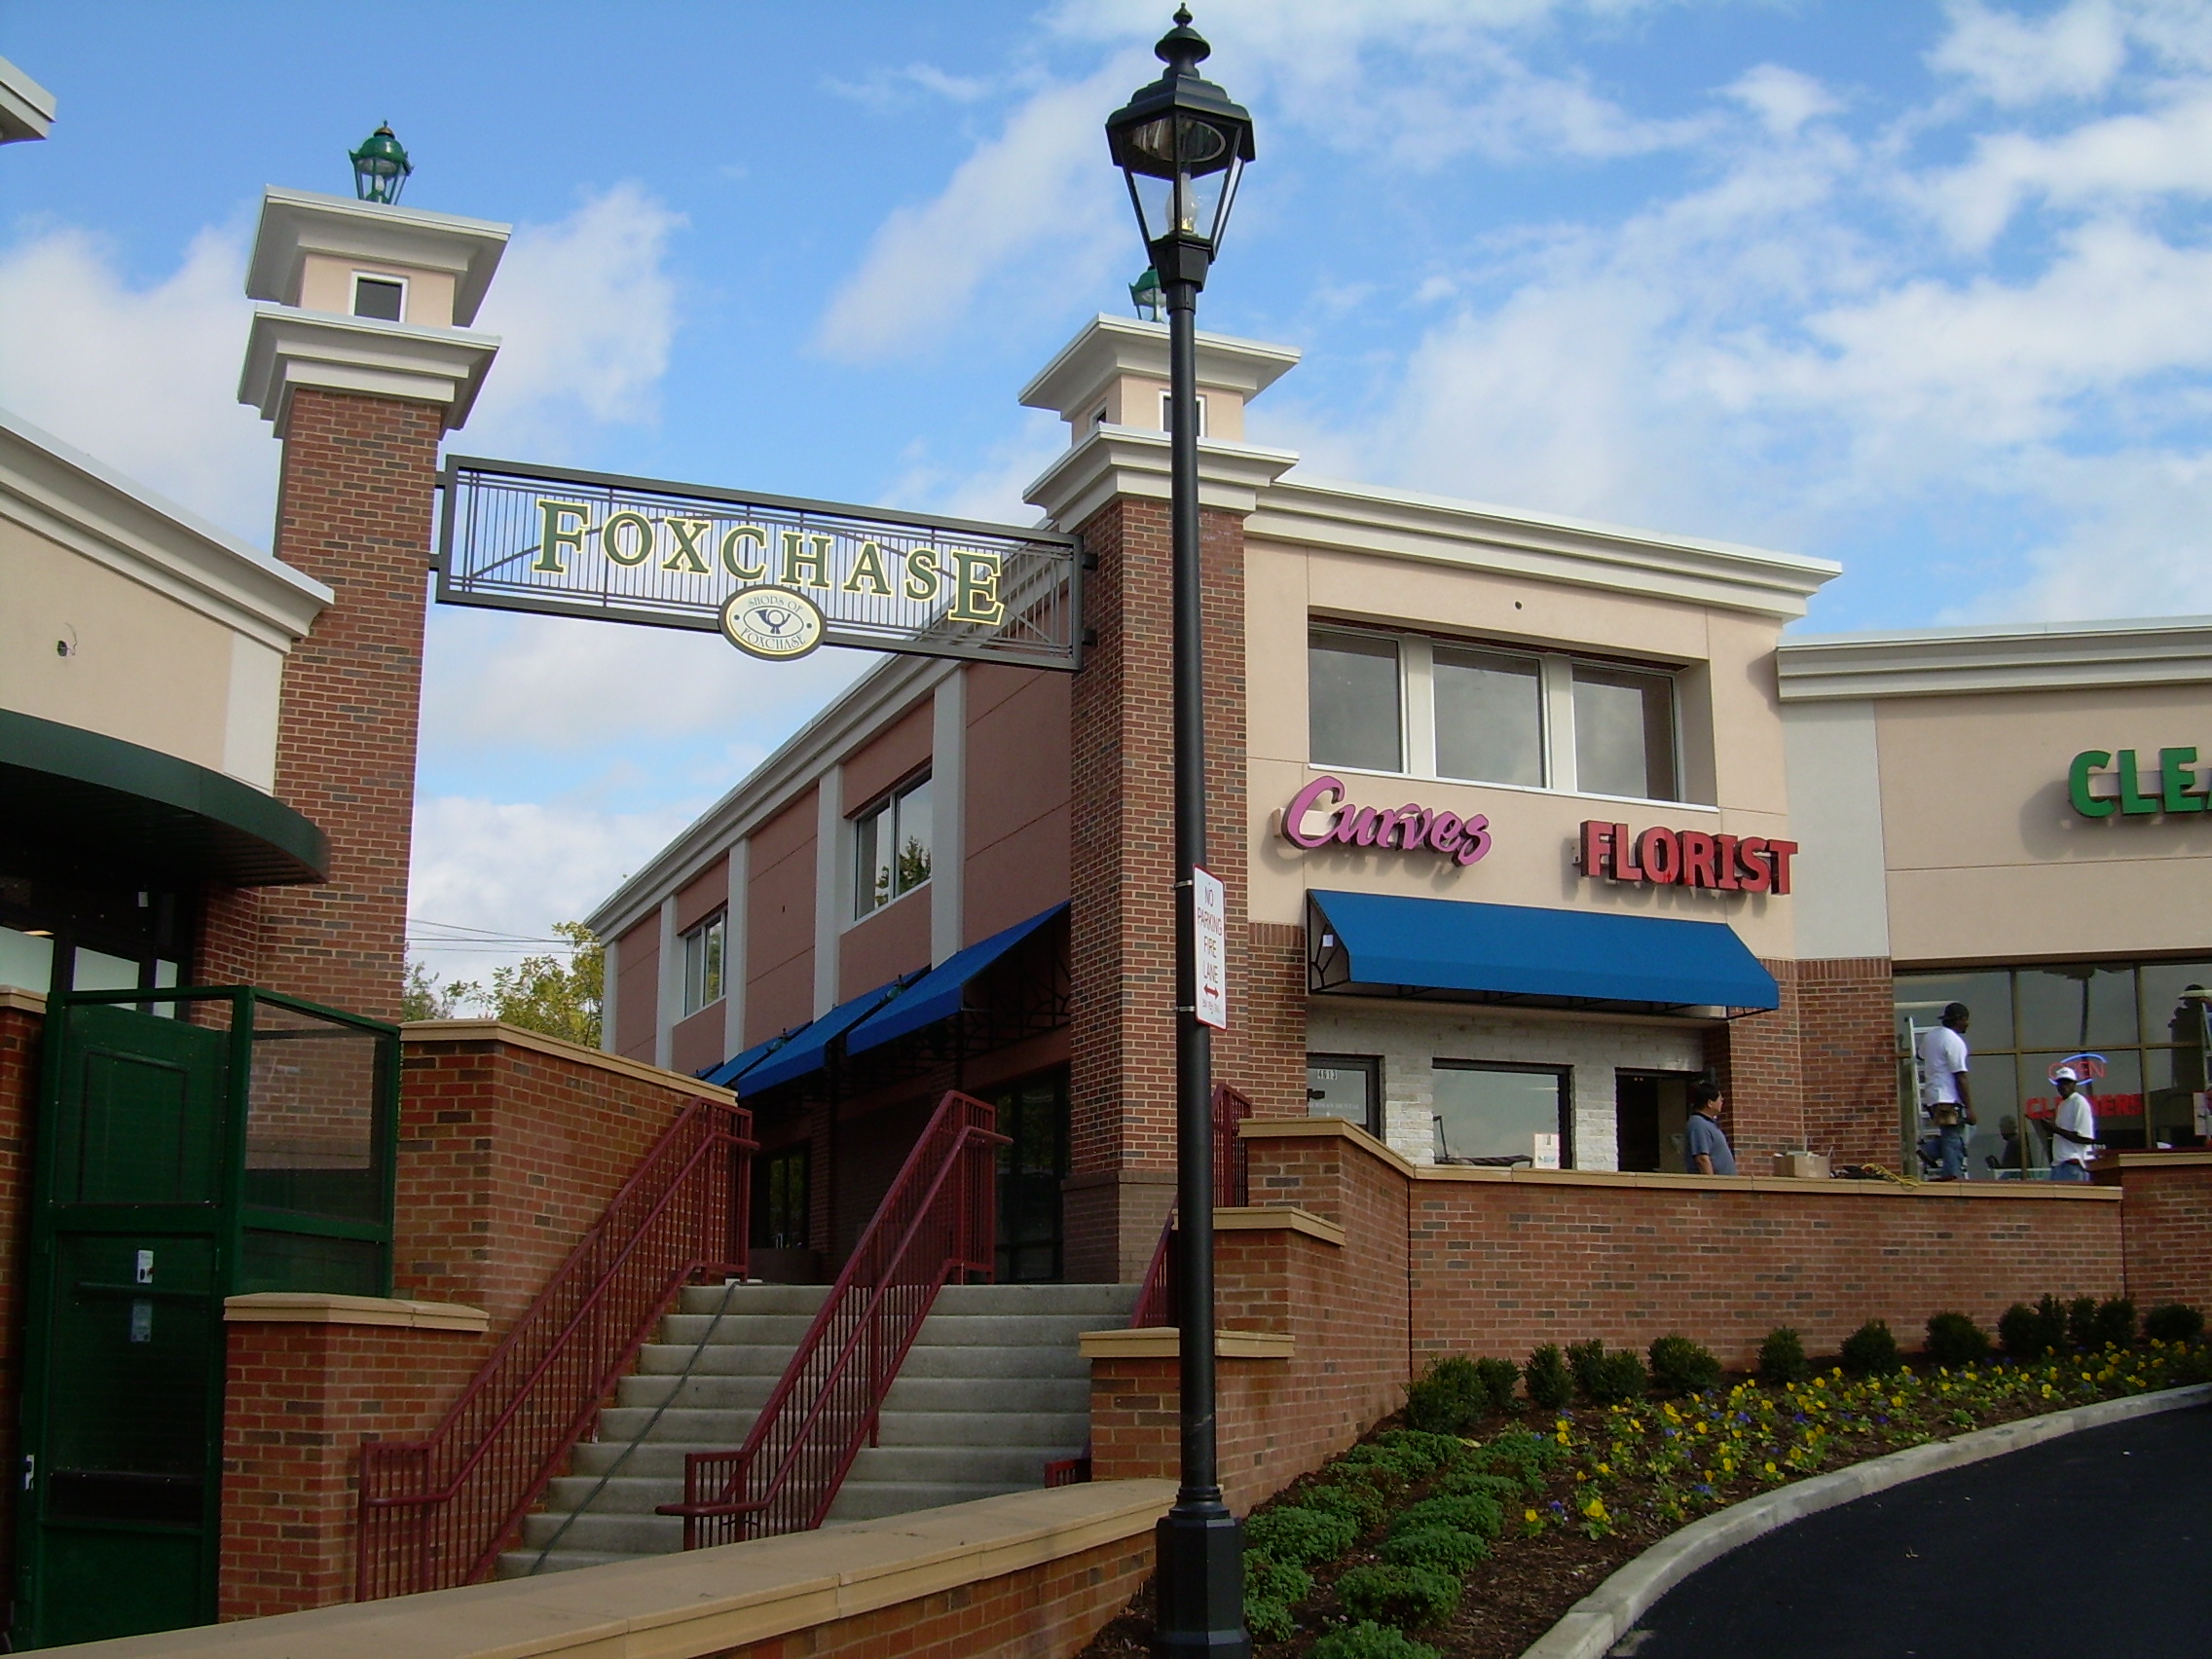 Foxchase Shopping Center